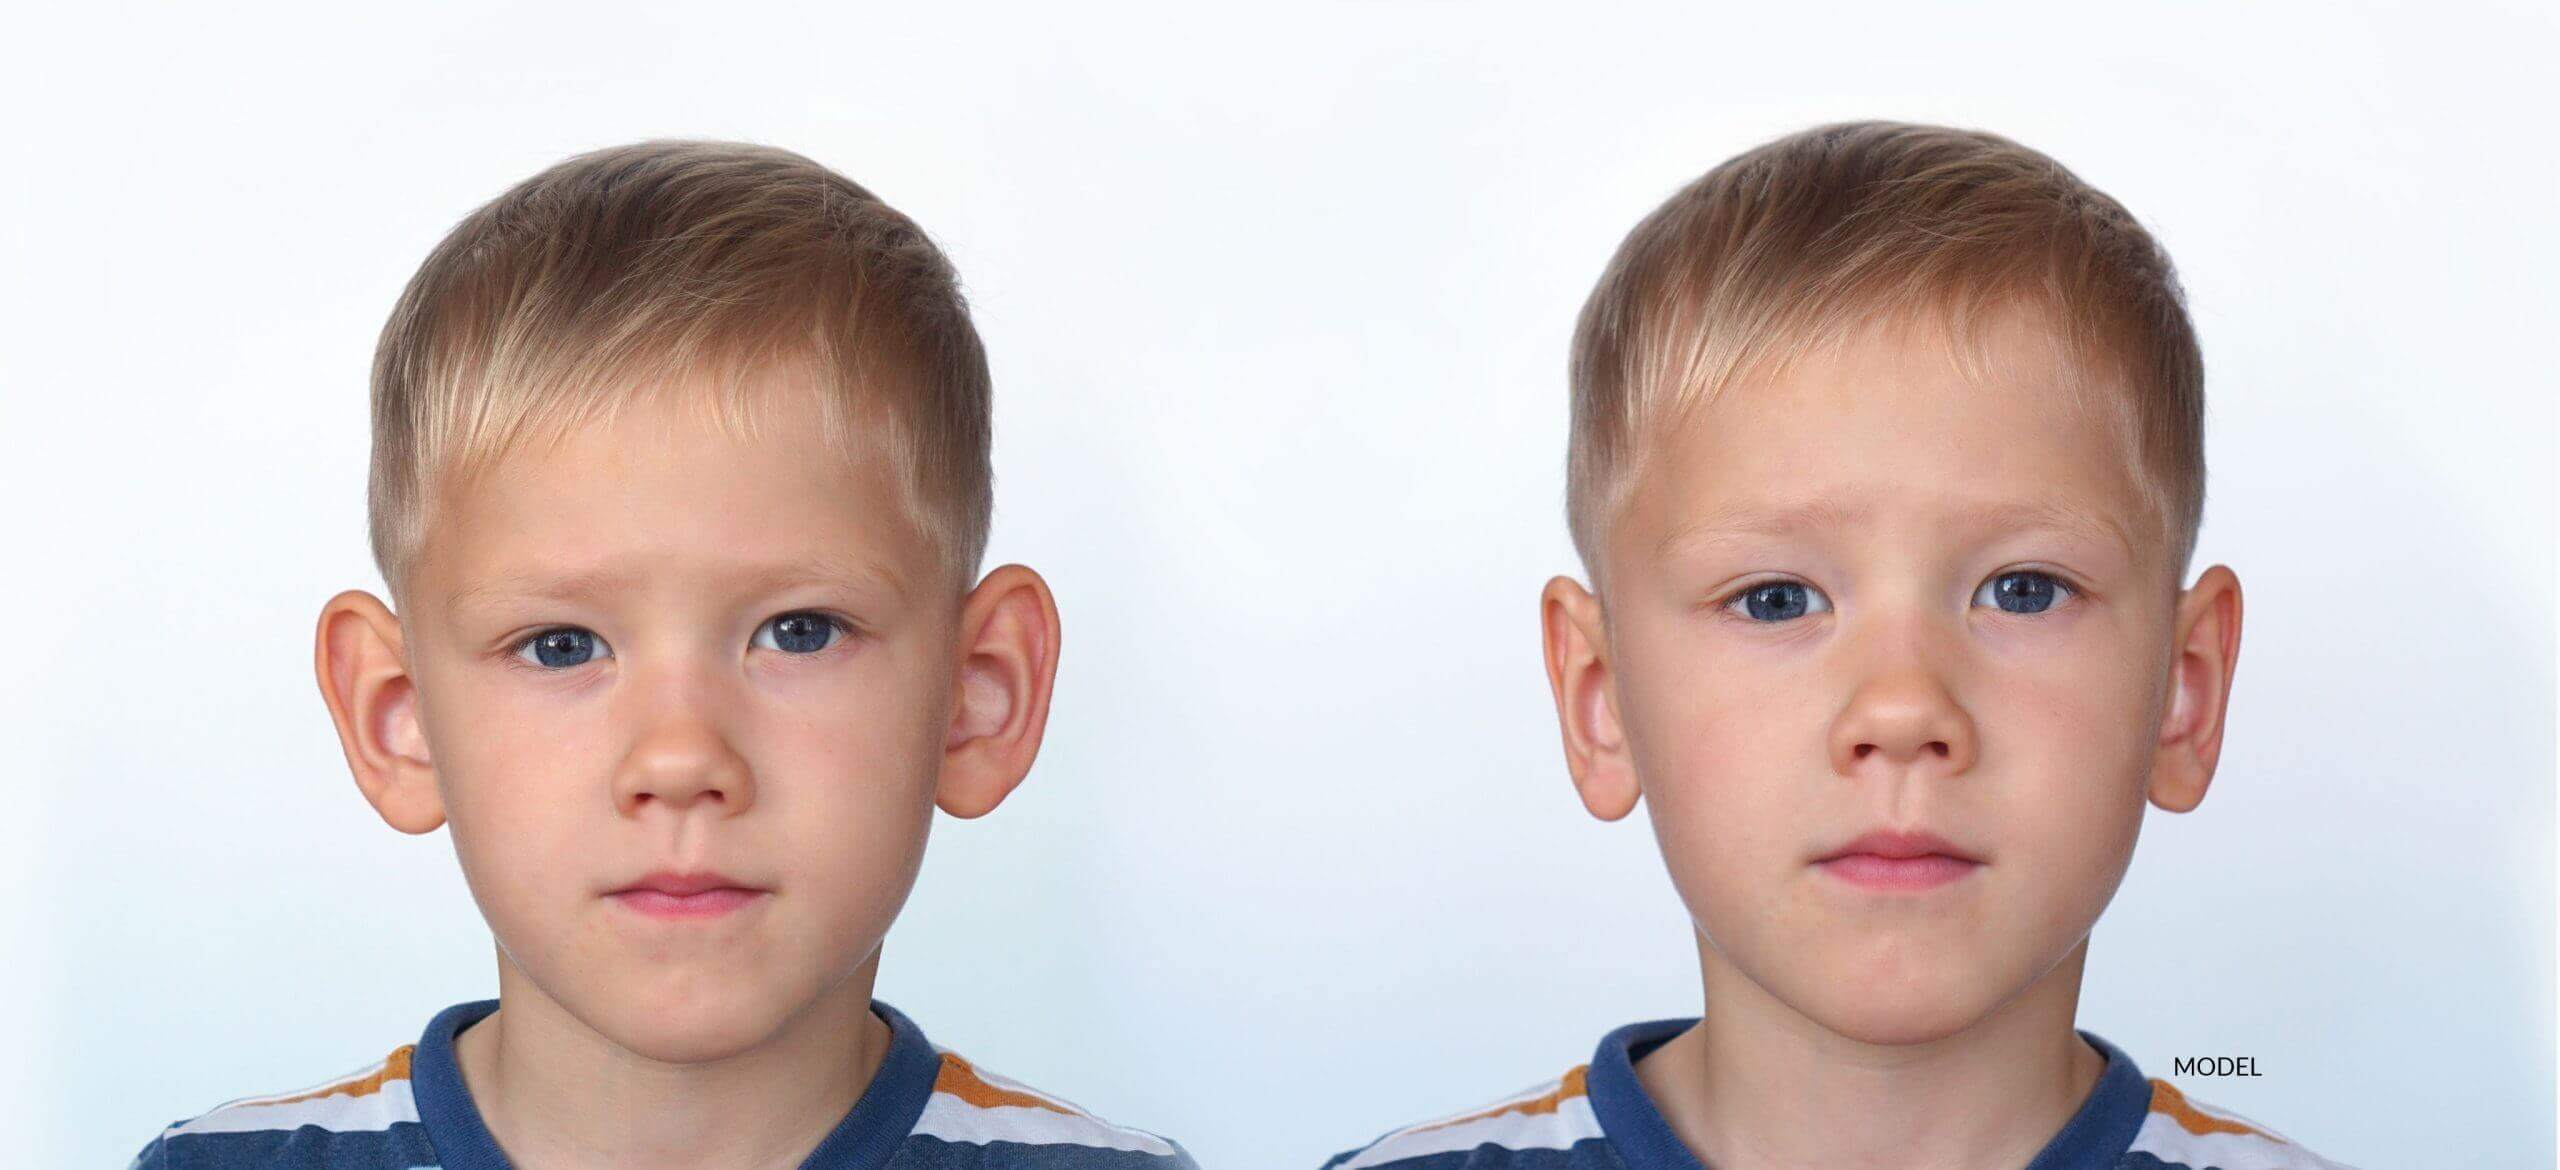 Boy - before and after otoplasty.